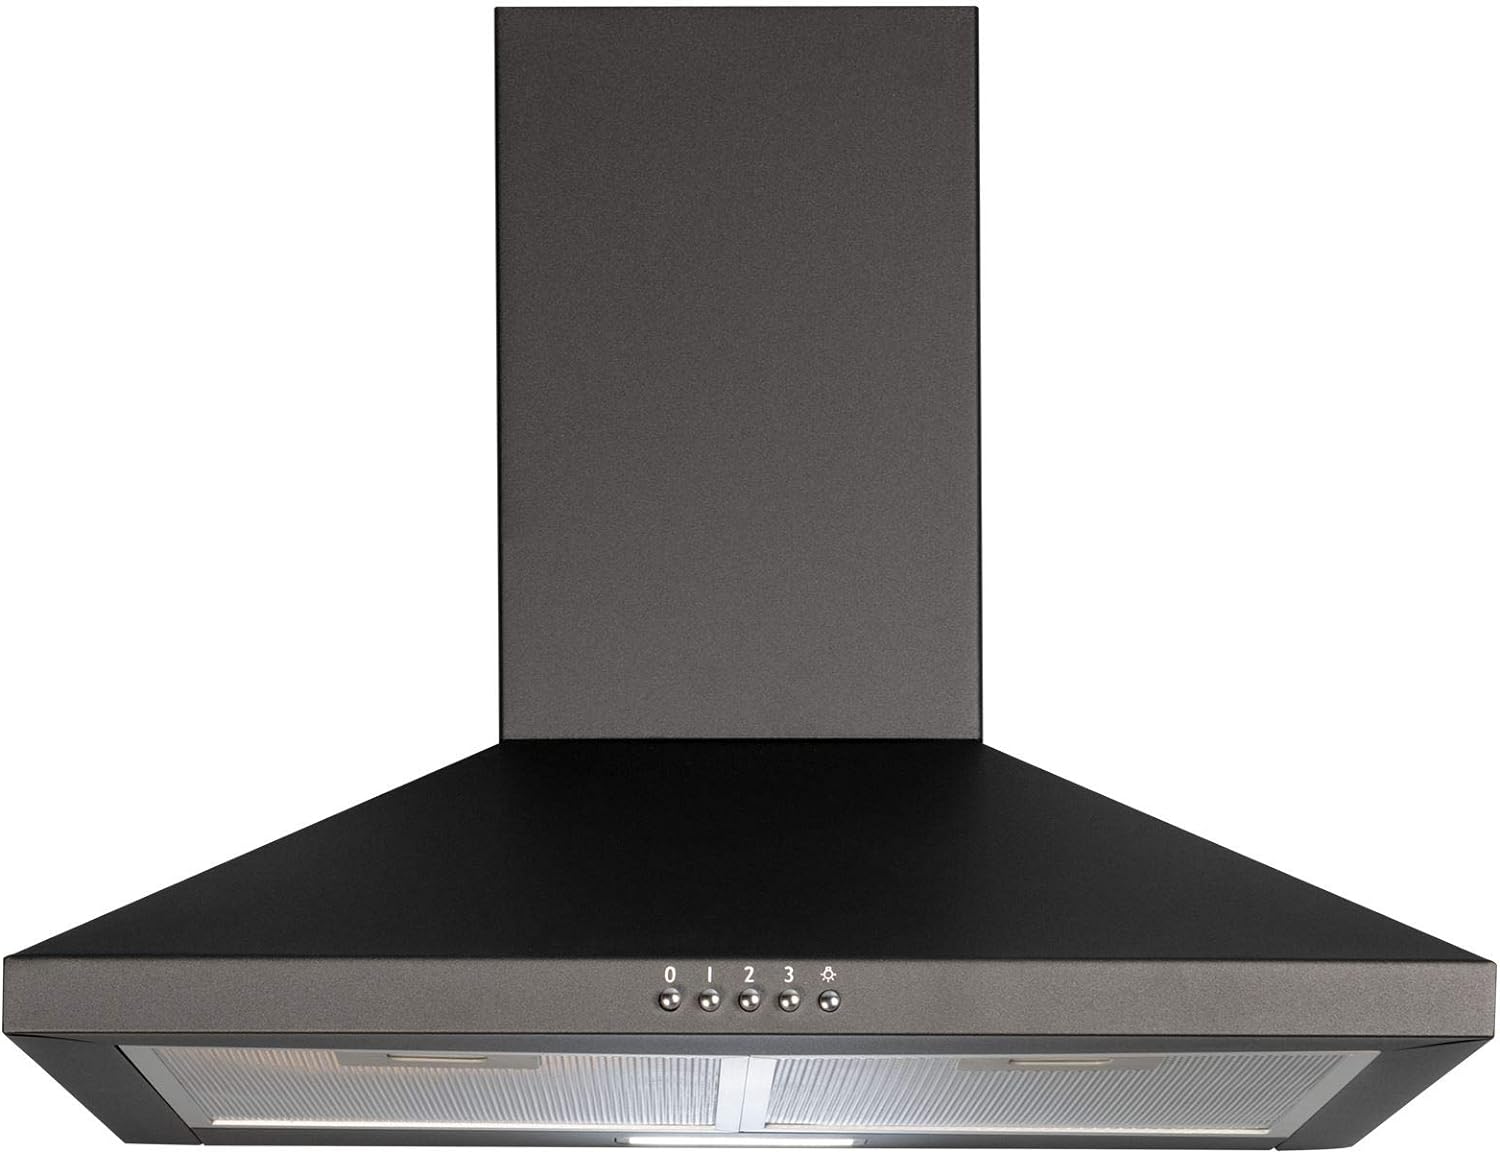 SIA CHL60BL 60cm Pyramid Chimney Cooker Hood Kitchen Extractor Fan In Black, 5 Year Parts & 2 Year Labour Guarantee, Internal Re - circulation Or External Extraction, 3 Variable Speeds - Amazing Gadgets Outlet